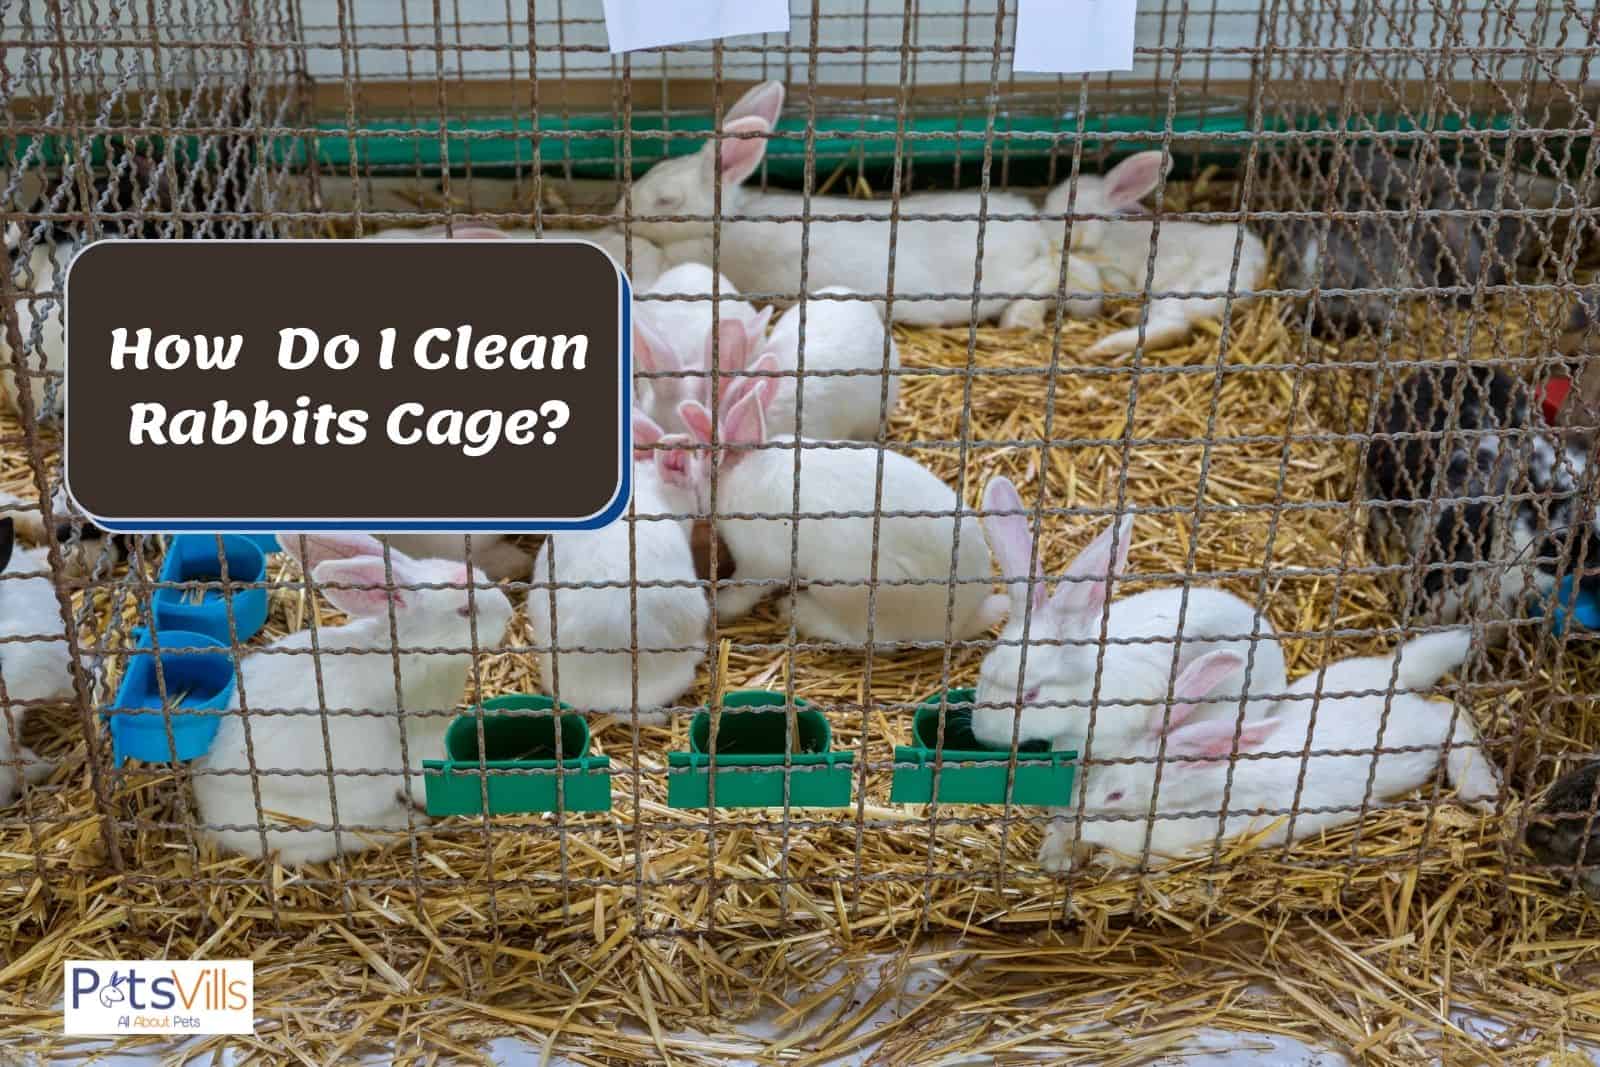 cage full of rabbits: how to clean rabbits cage properly